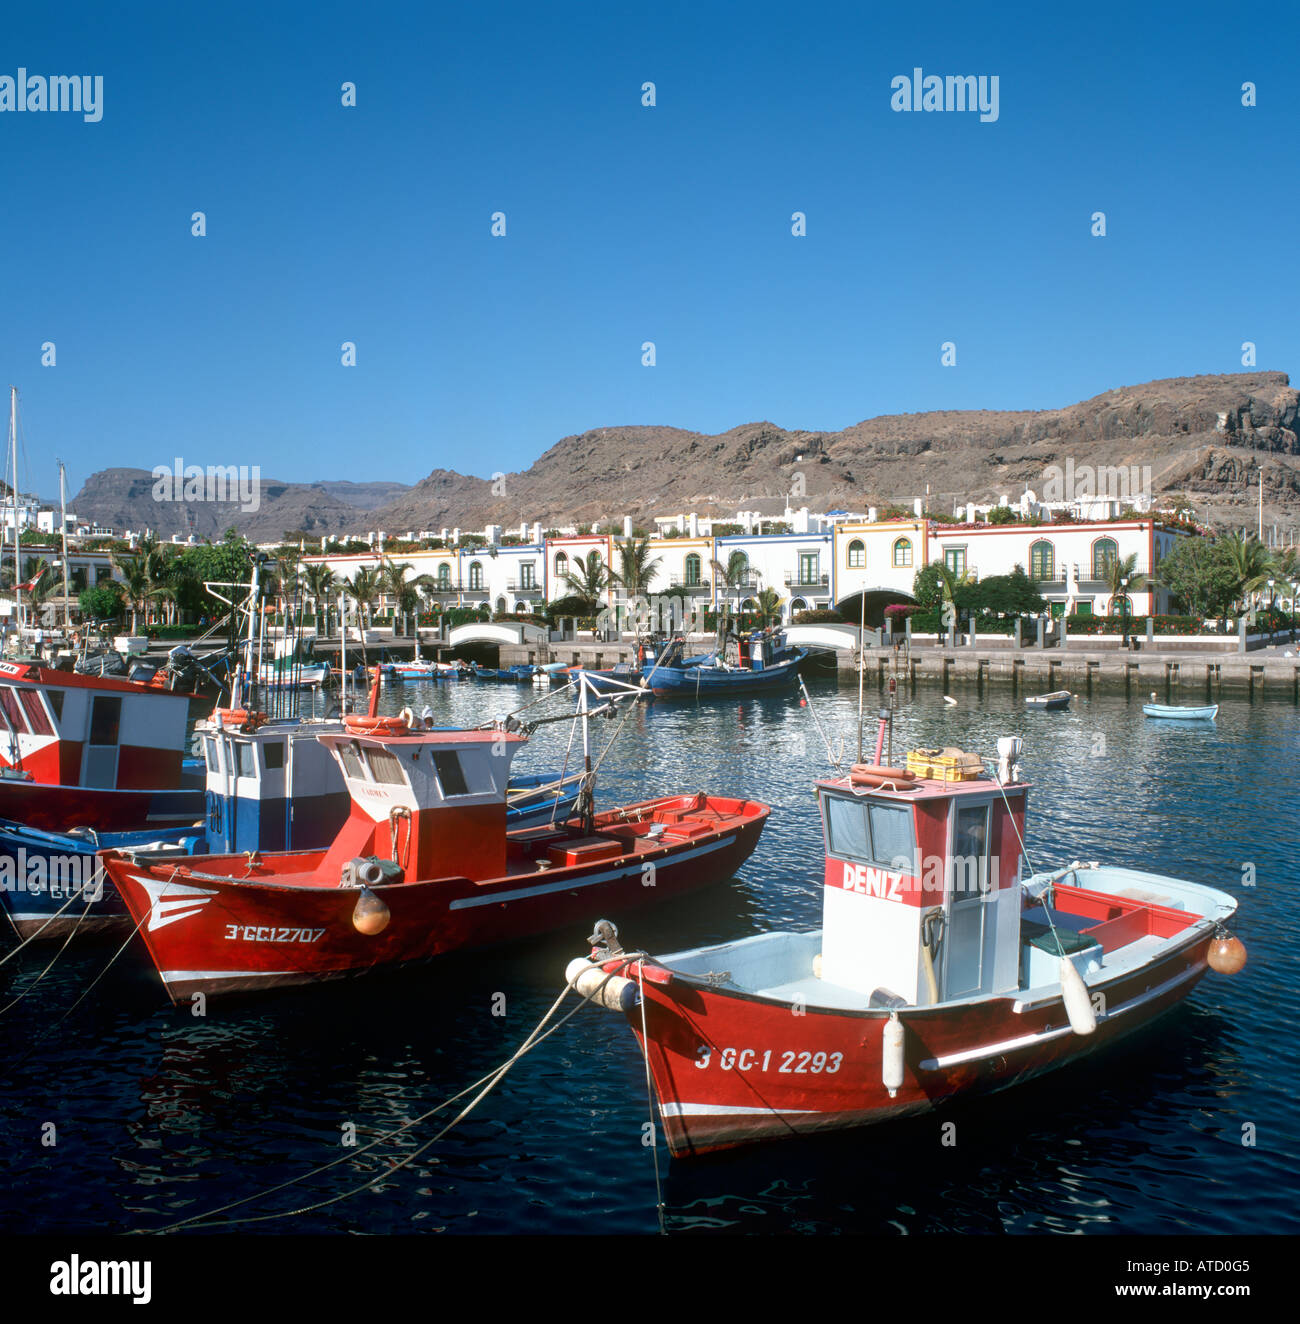 Boats in the harbour at Puerto Mogan, Gran Canaria, Canary Islands, Spain Stock Photo